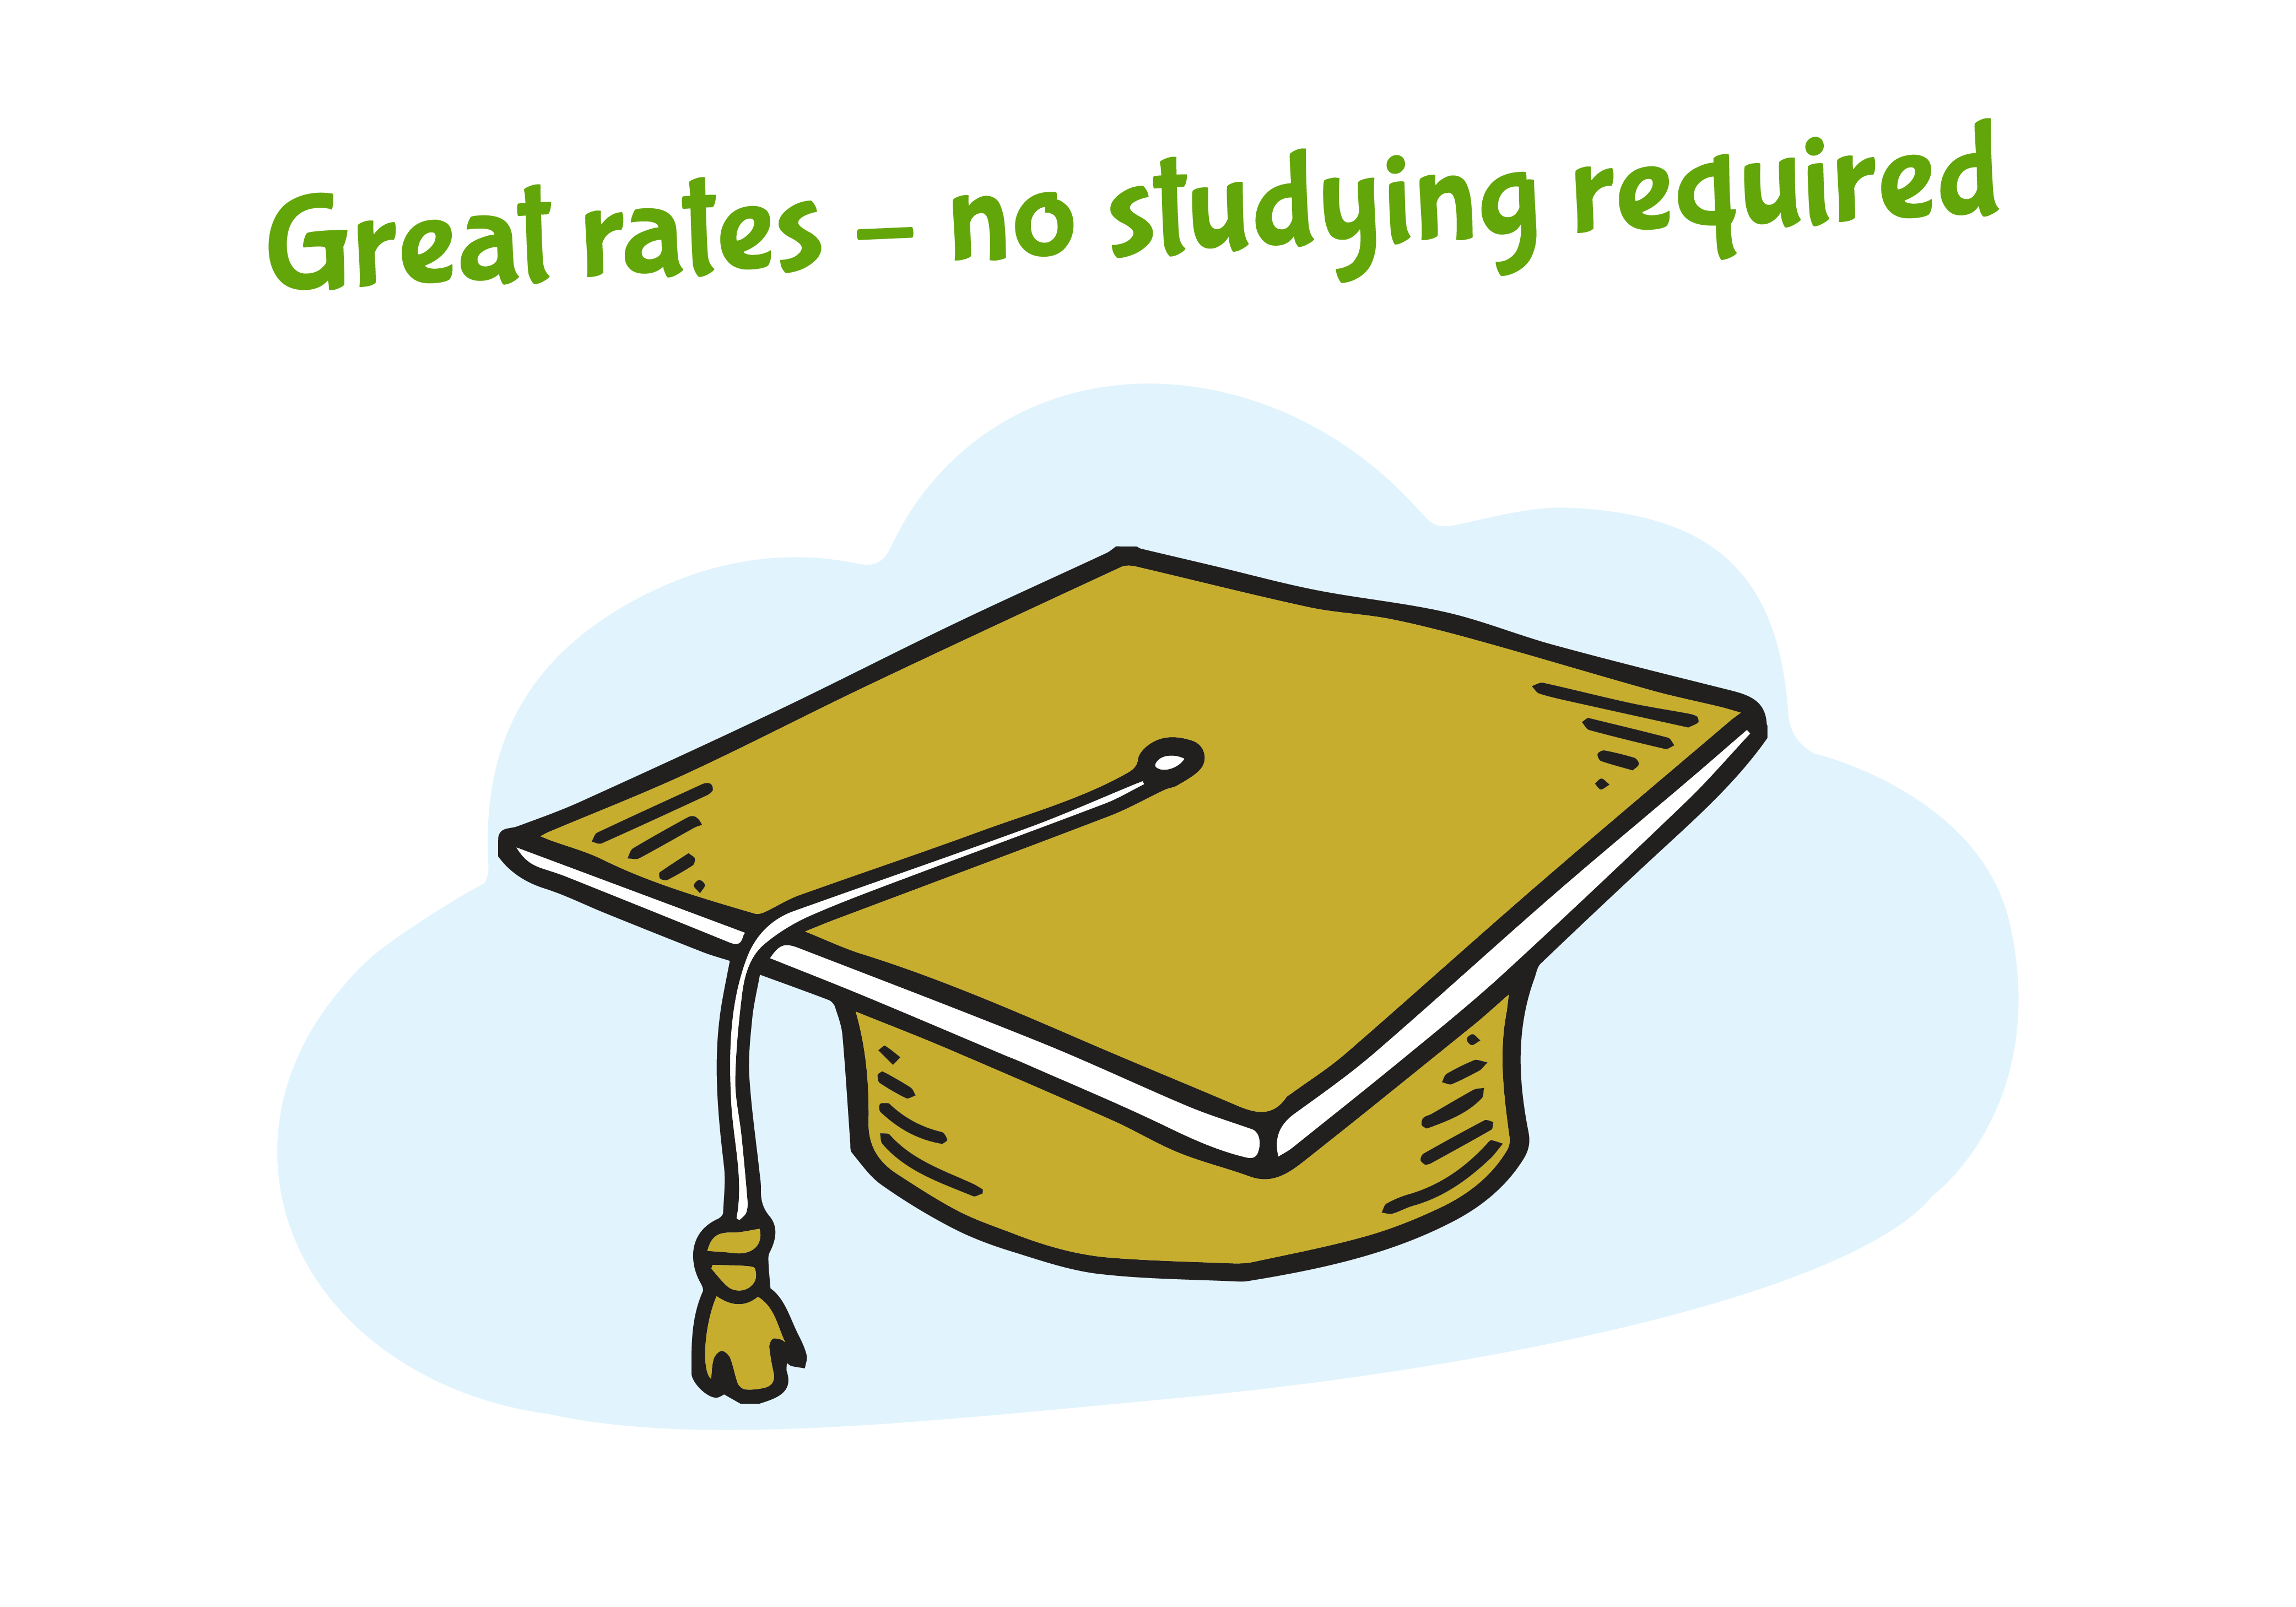 Great rates - No studying required